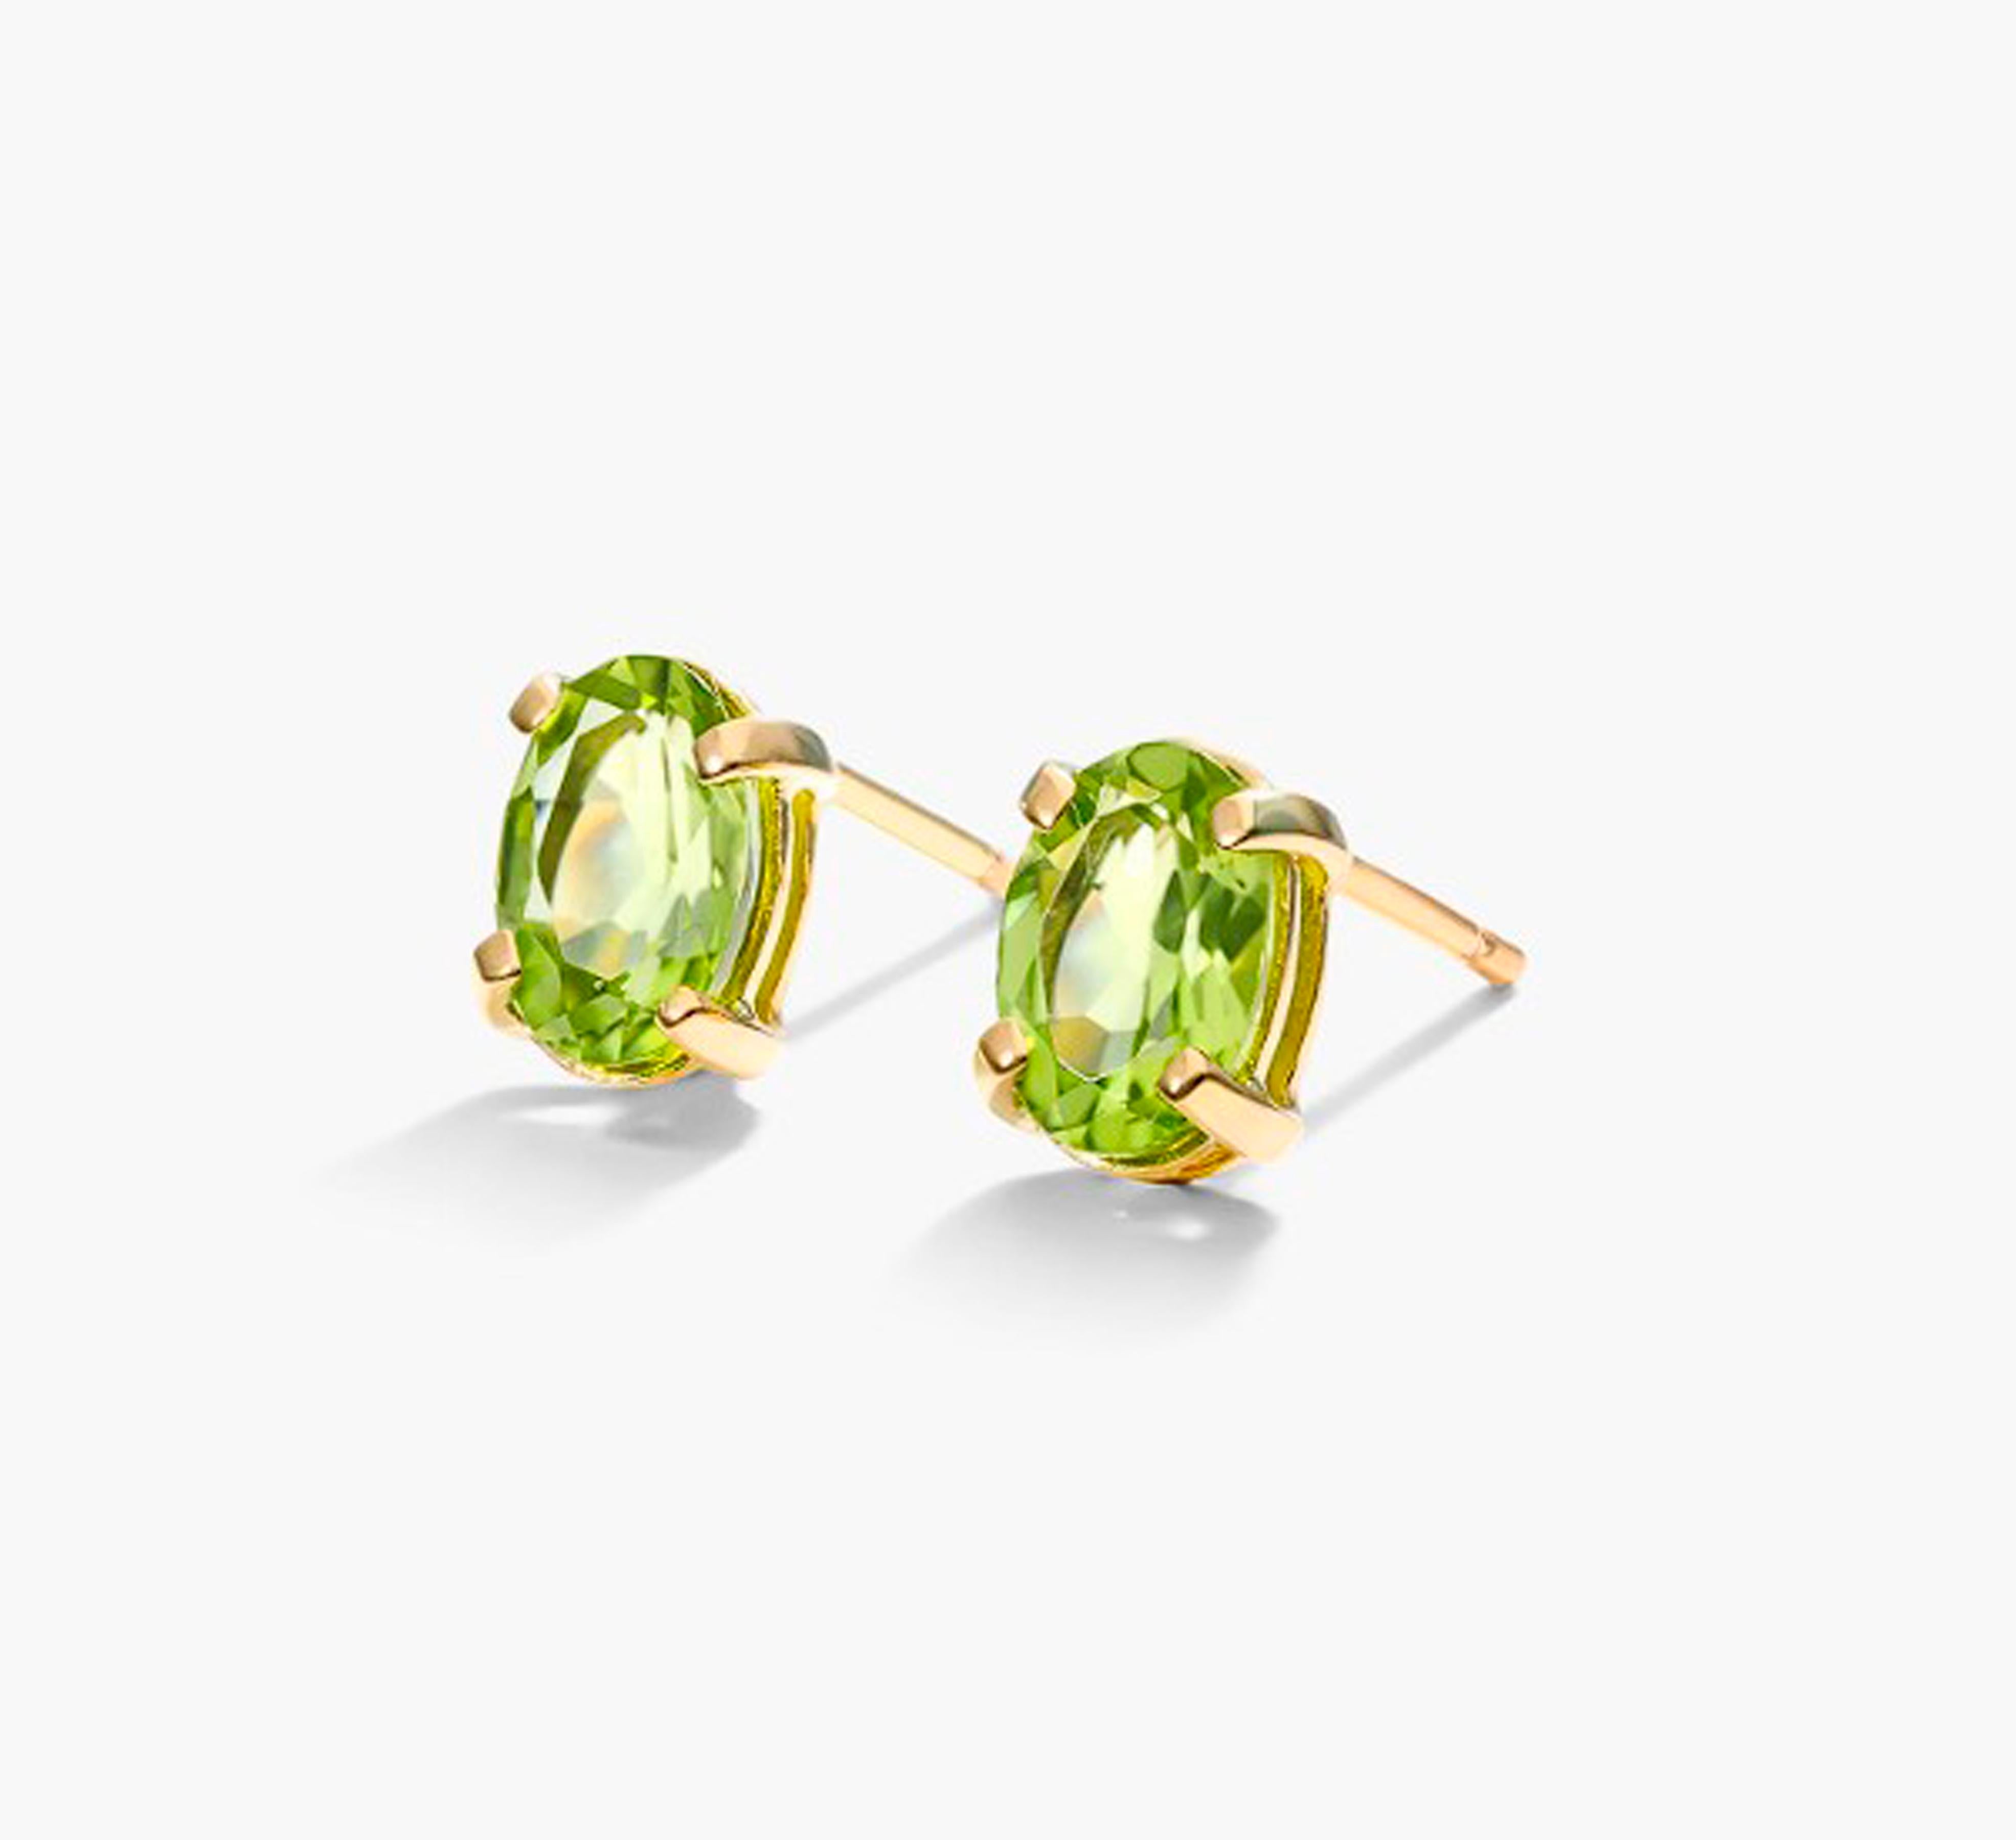 August birthstone peridot 14k gold earrings studs. 
Genuine peridot 14k gold earrings. Oval peridot earrings. Simple peridot earrings. 

Metal: 14k solid gold
Weight: 2 gr 
Central gemstone:
Natural peridot , 2 pieces
Color - olive green, apple